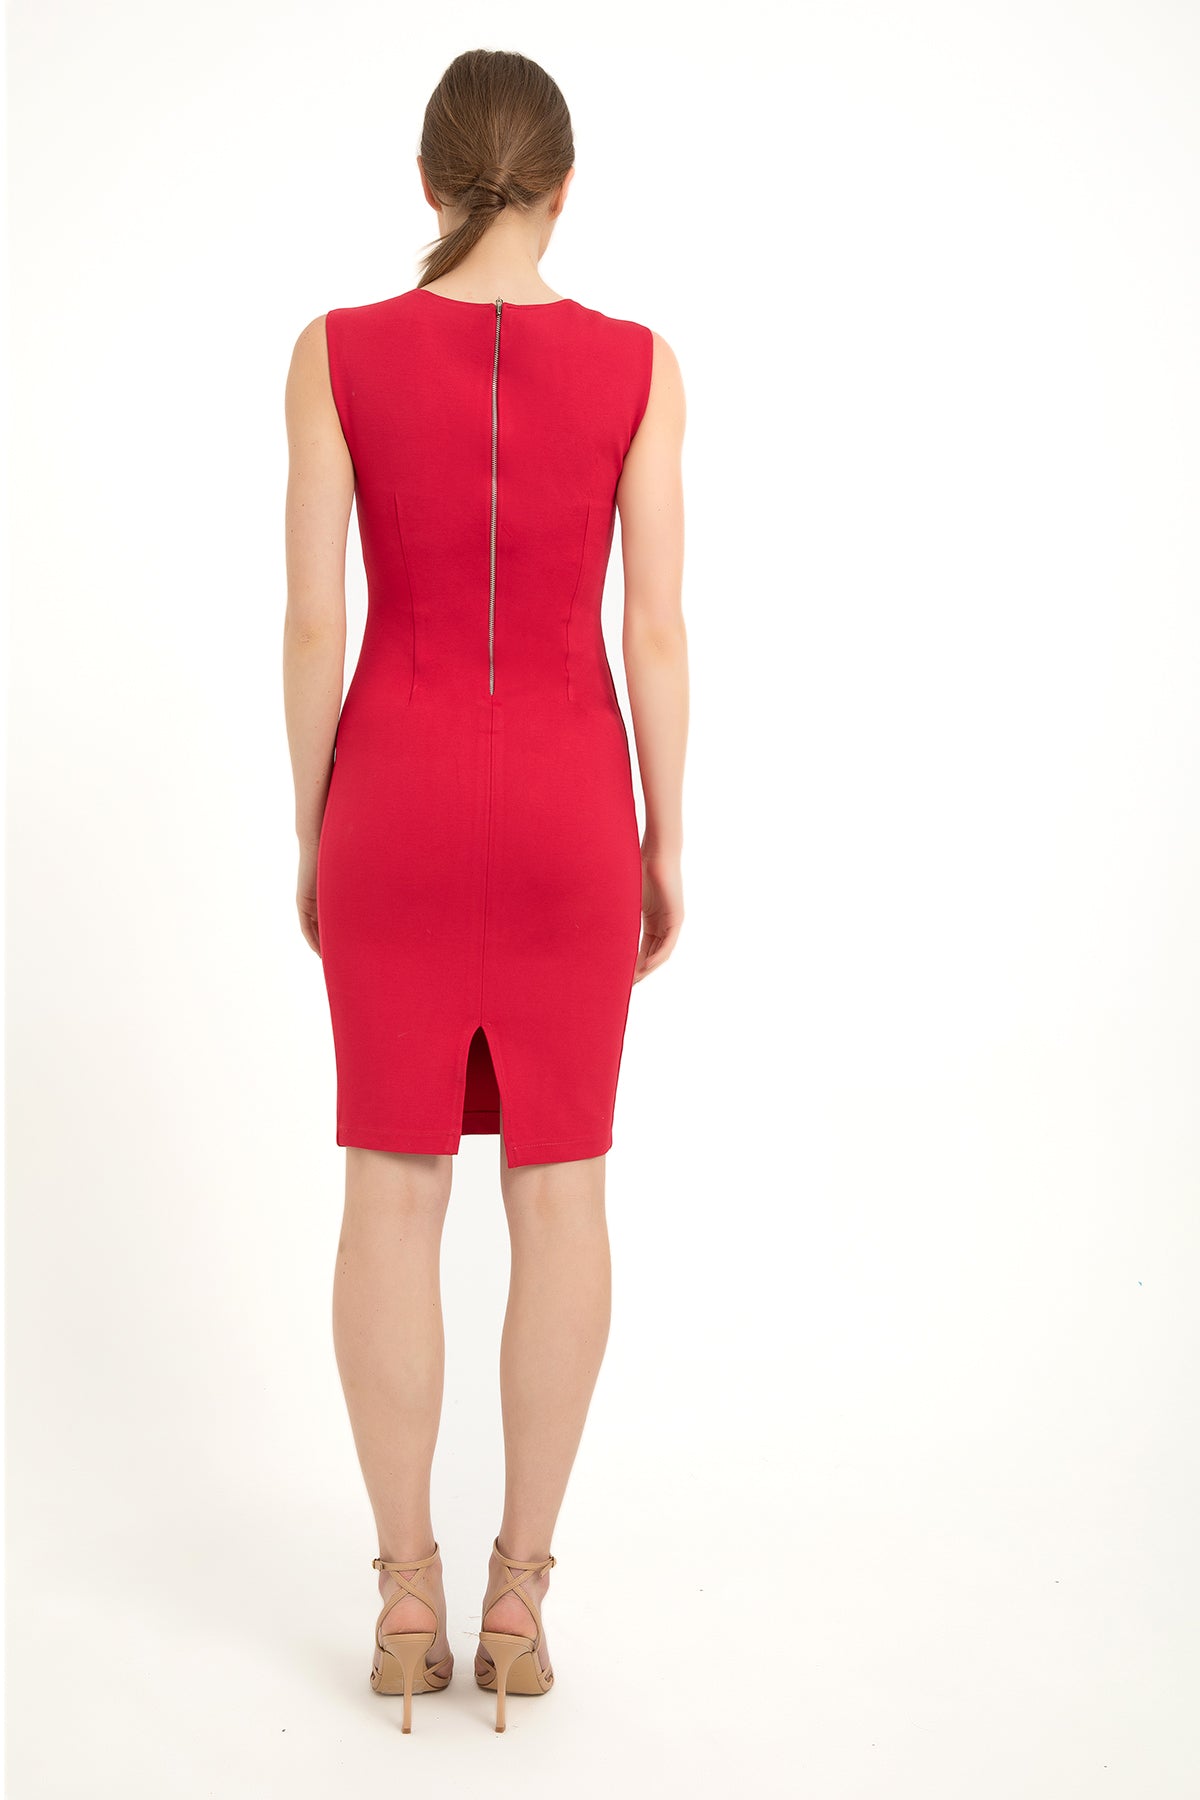 Sweetheart Neck Line Ponte Dress - Red